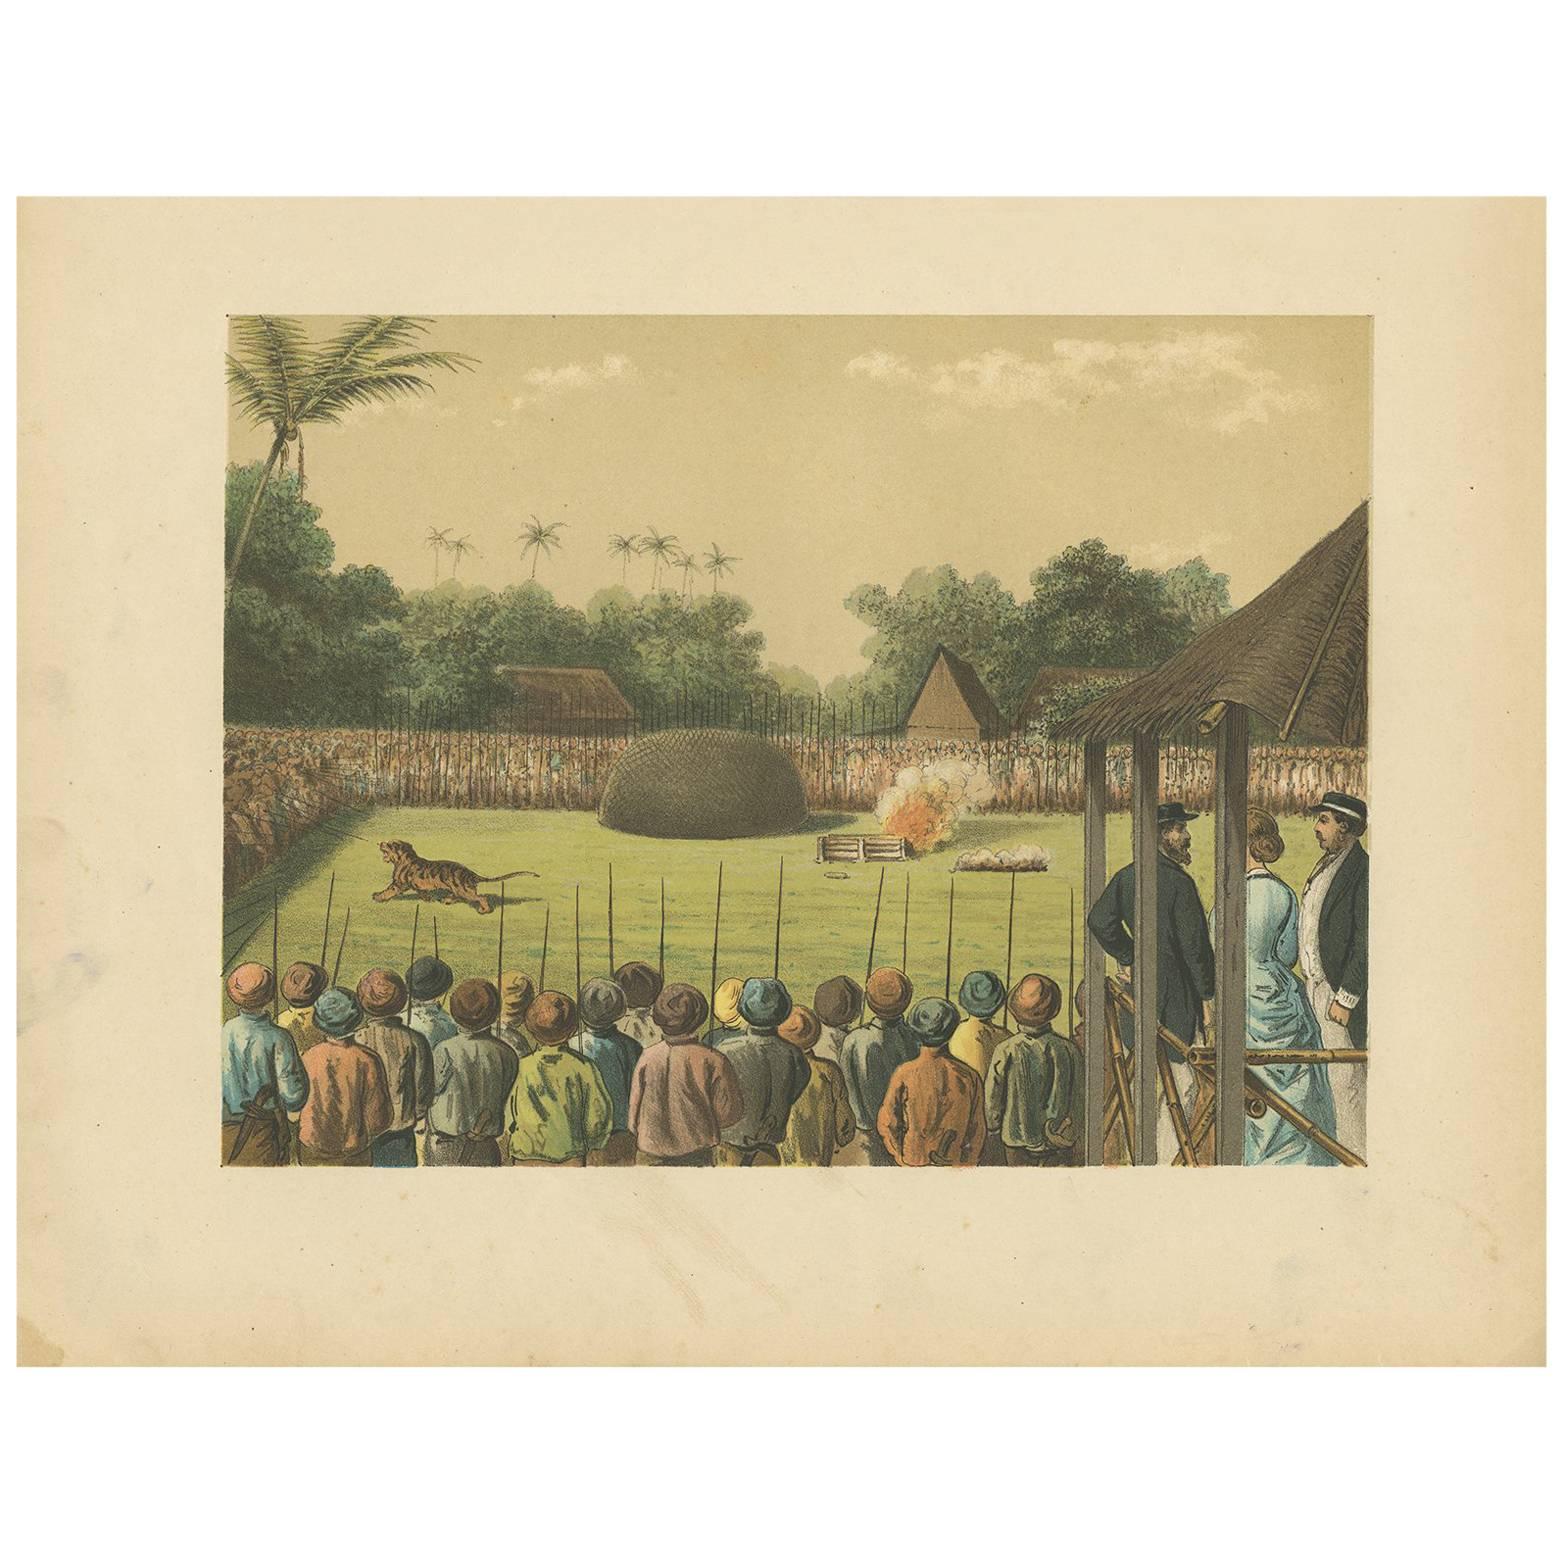 Antique Print of a Rampokan on Java by M.T.H. Perelaer, 1888